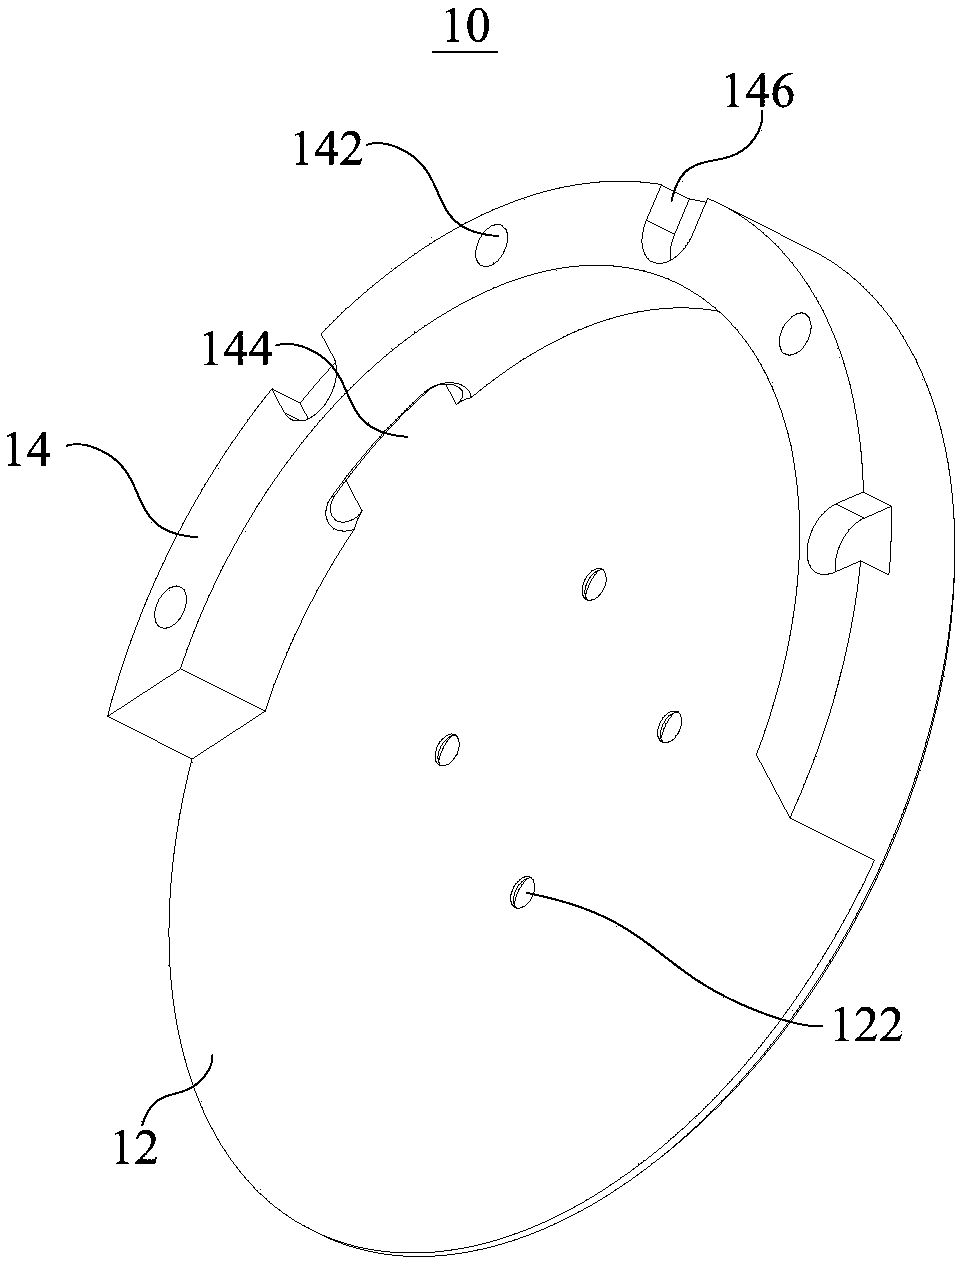 Exoskeleton robot, universal joint module and joint limit assembly thereof